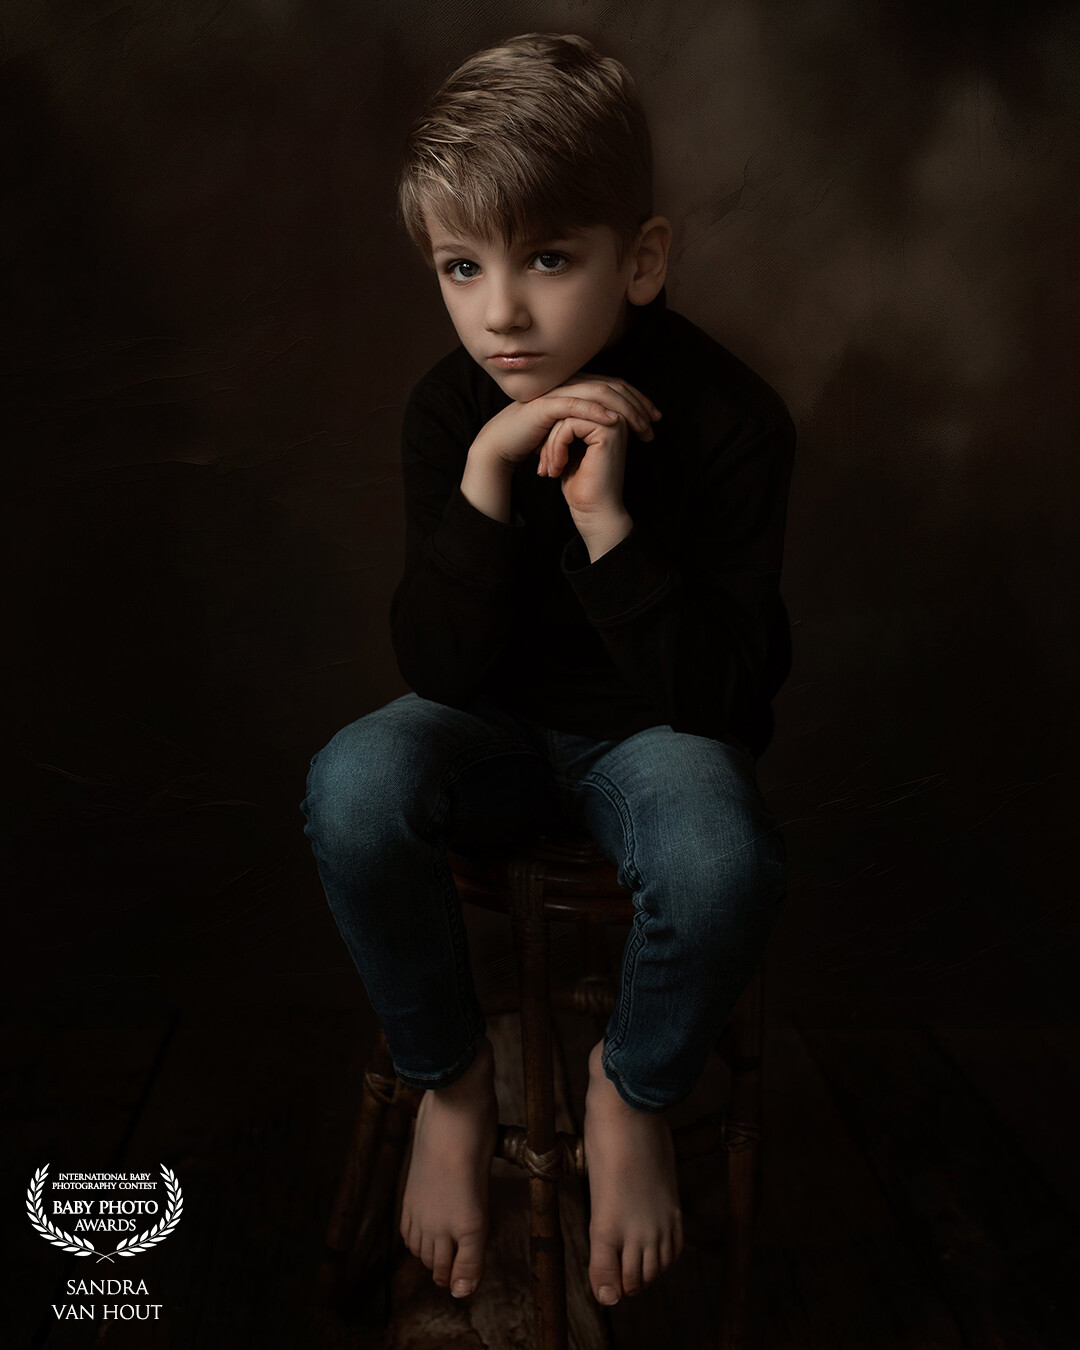 This is my youngest son! I am practice for fine-art portrait photography and I think i did a great job. This portrait means so much to me and I hope I will give my clients the same feeling when i photograph there children this way.